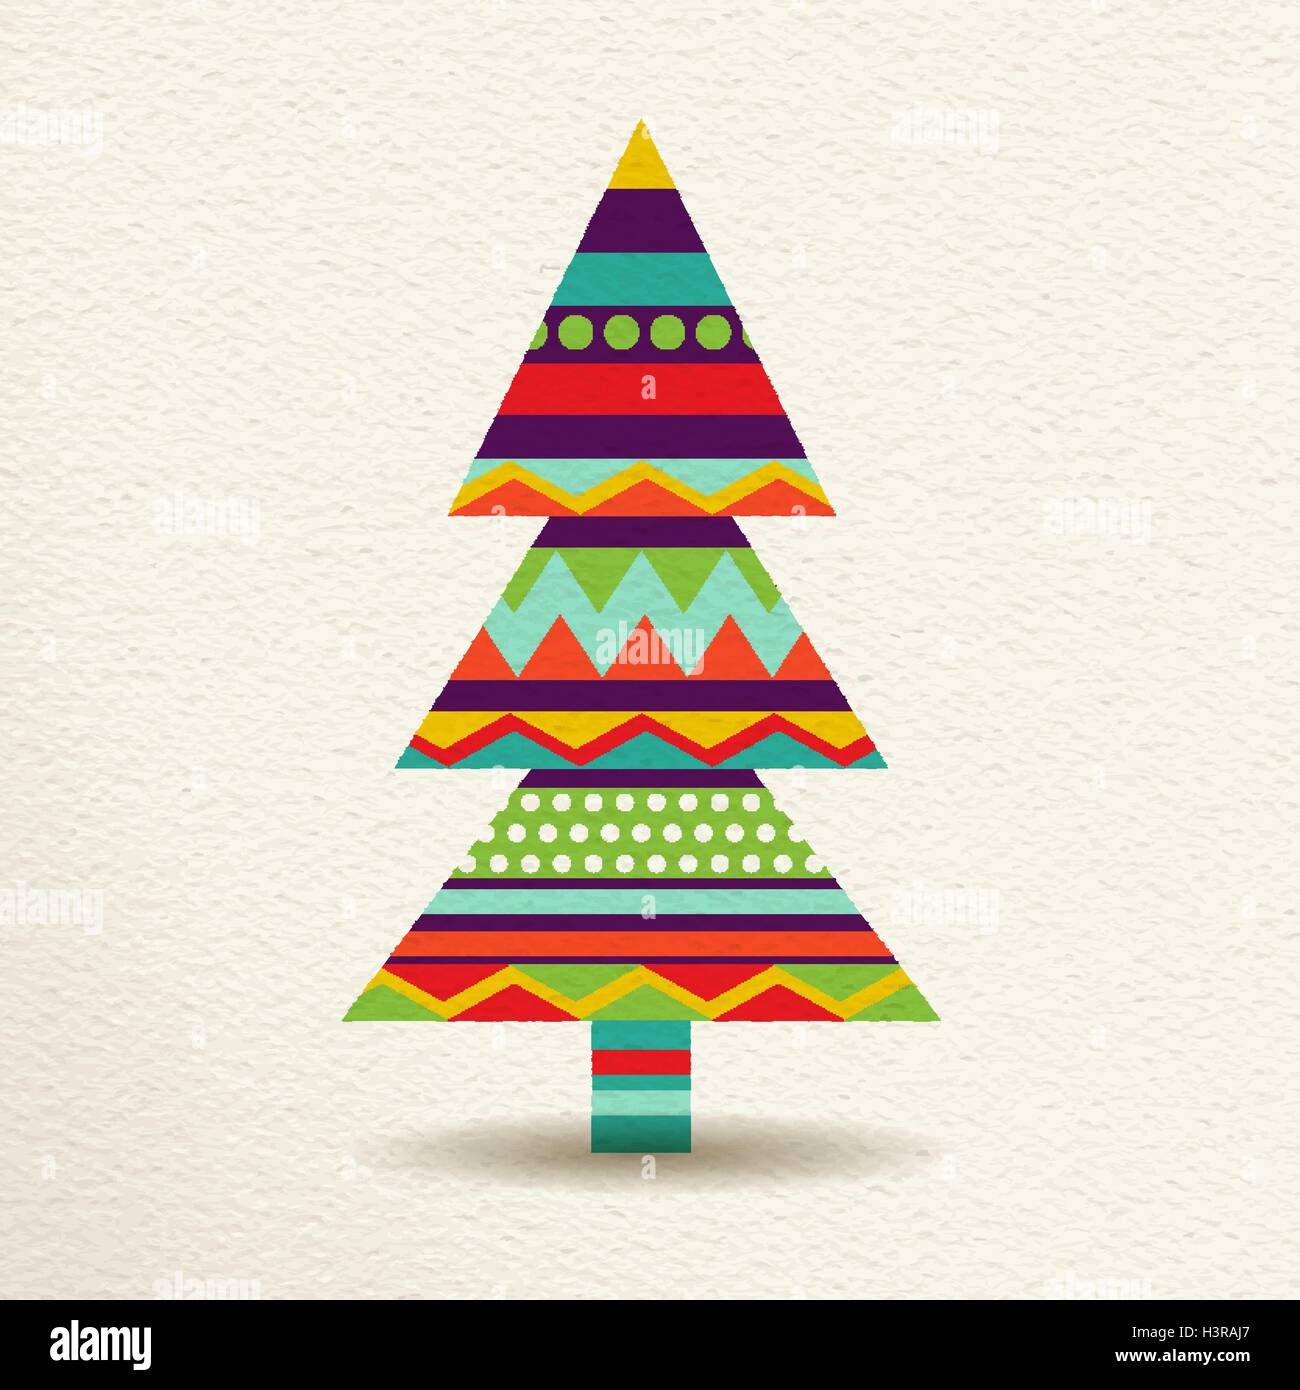 Merry Christmas pine tree in fun happy colors with abstract geometric shapes, concept holiday design. EPS10 vector. Stock Vector